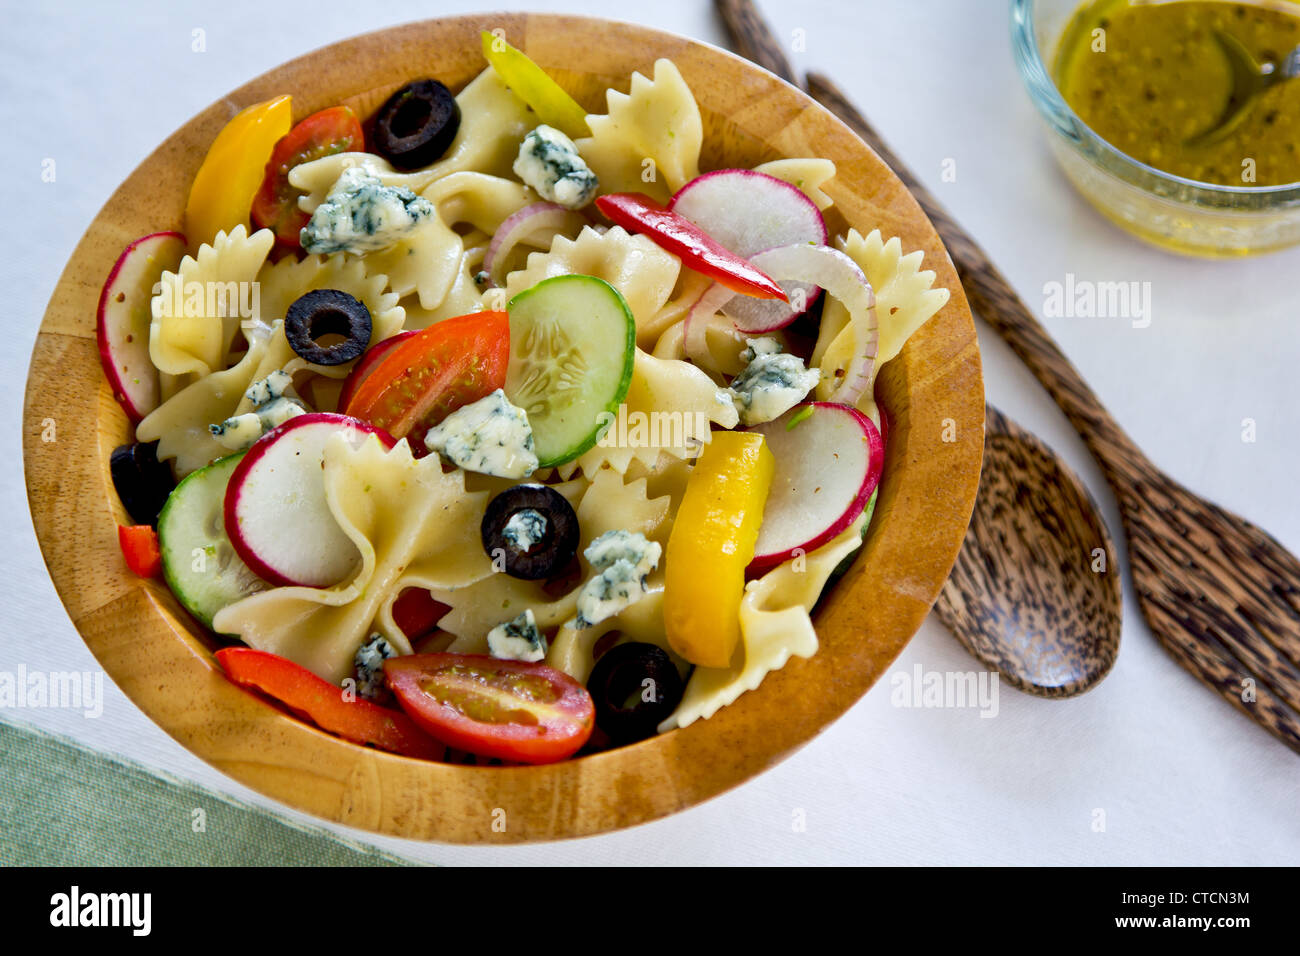 Farfalle with blue cheese salad Stock Photo